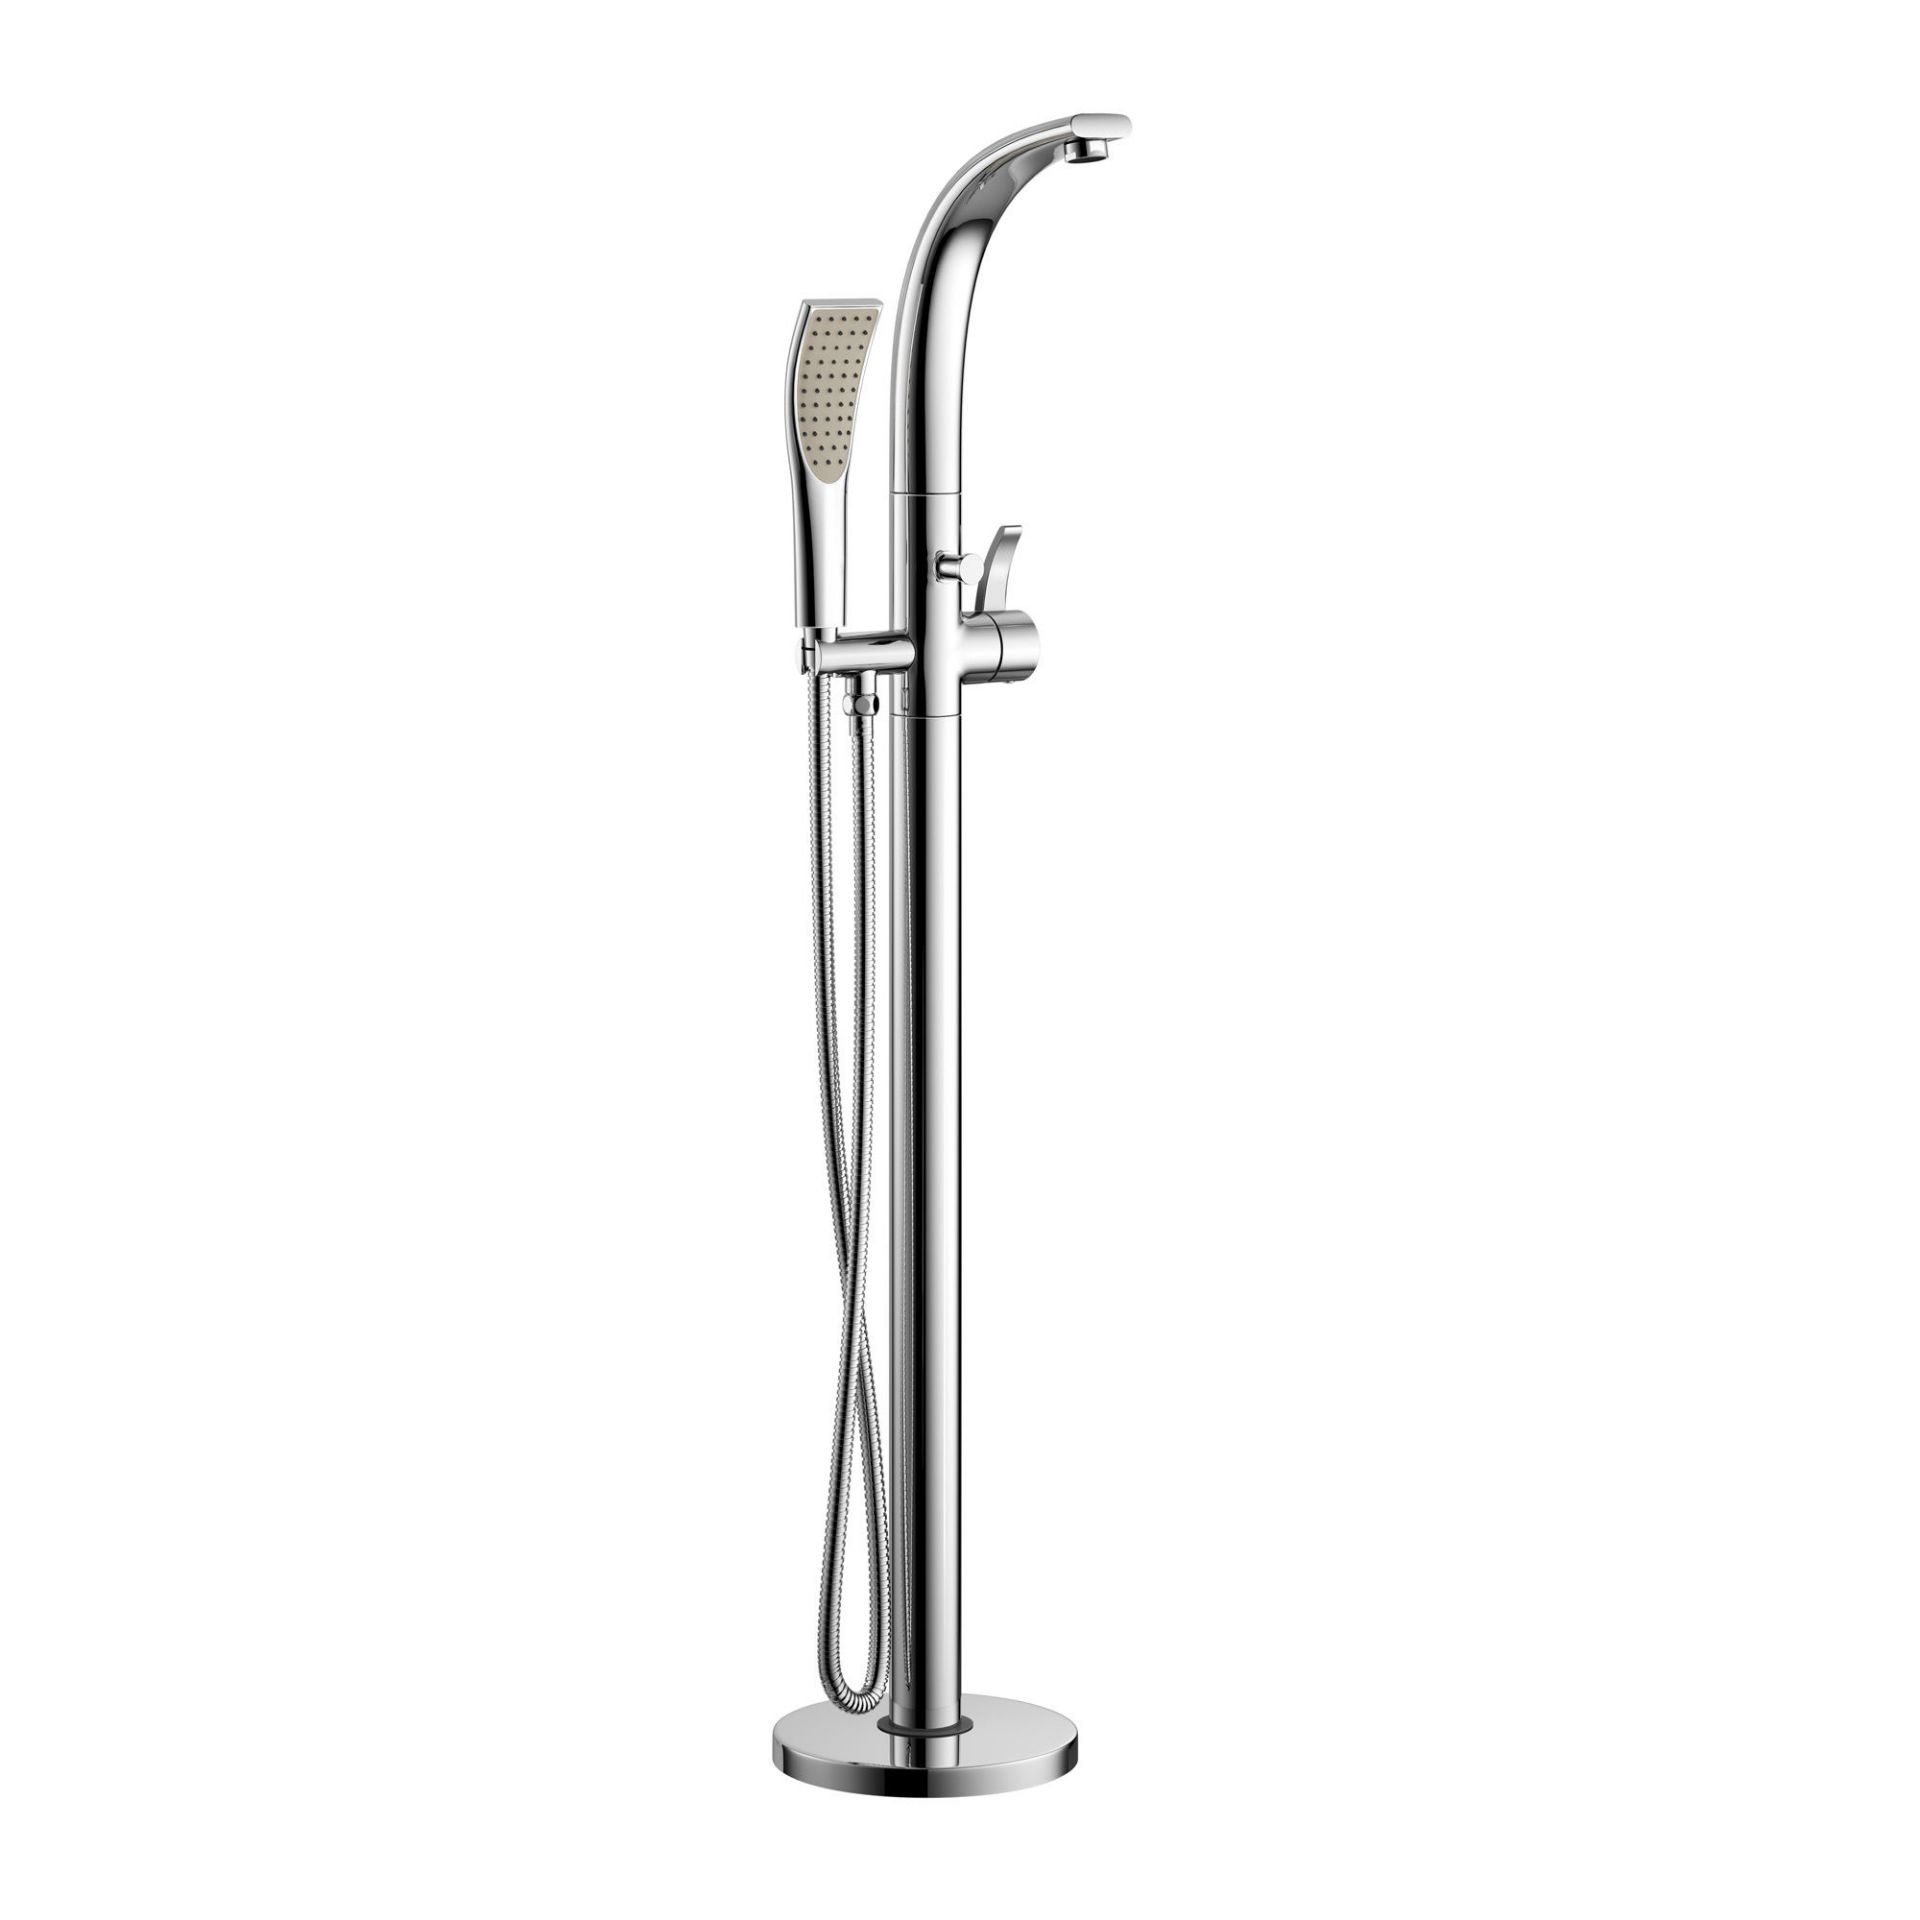 (XM191) Ava Freestanding Bath Mixer Tap with Handheld Shower Head. We love this because it has a - Image 2 of 2